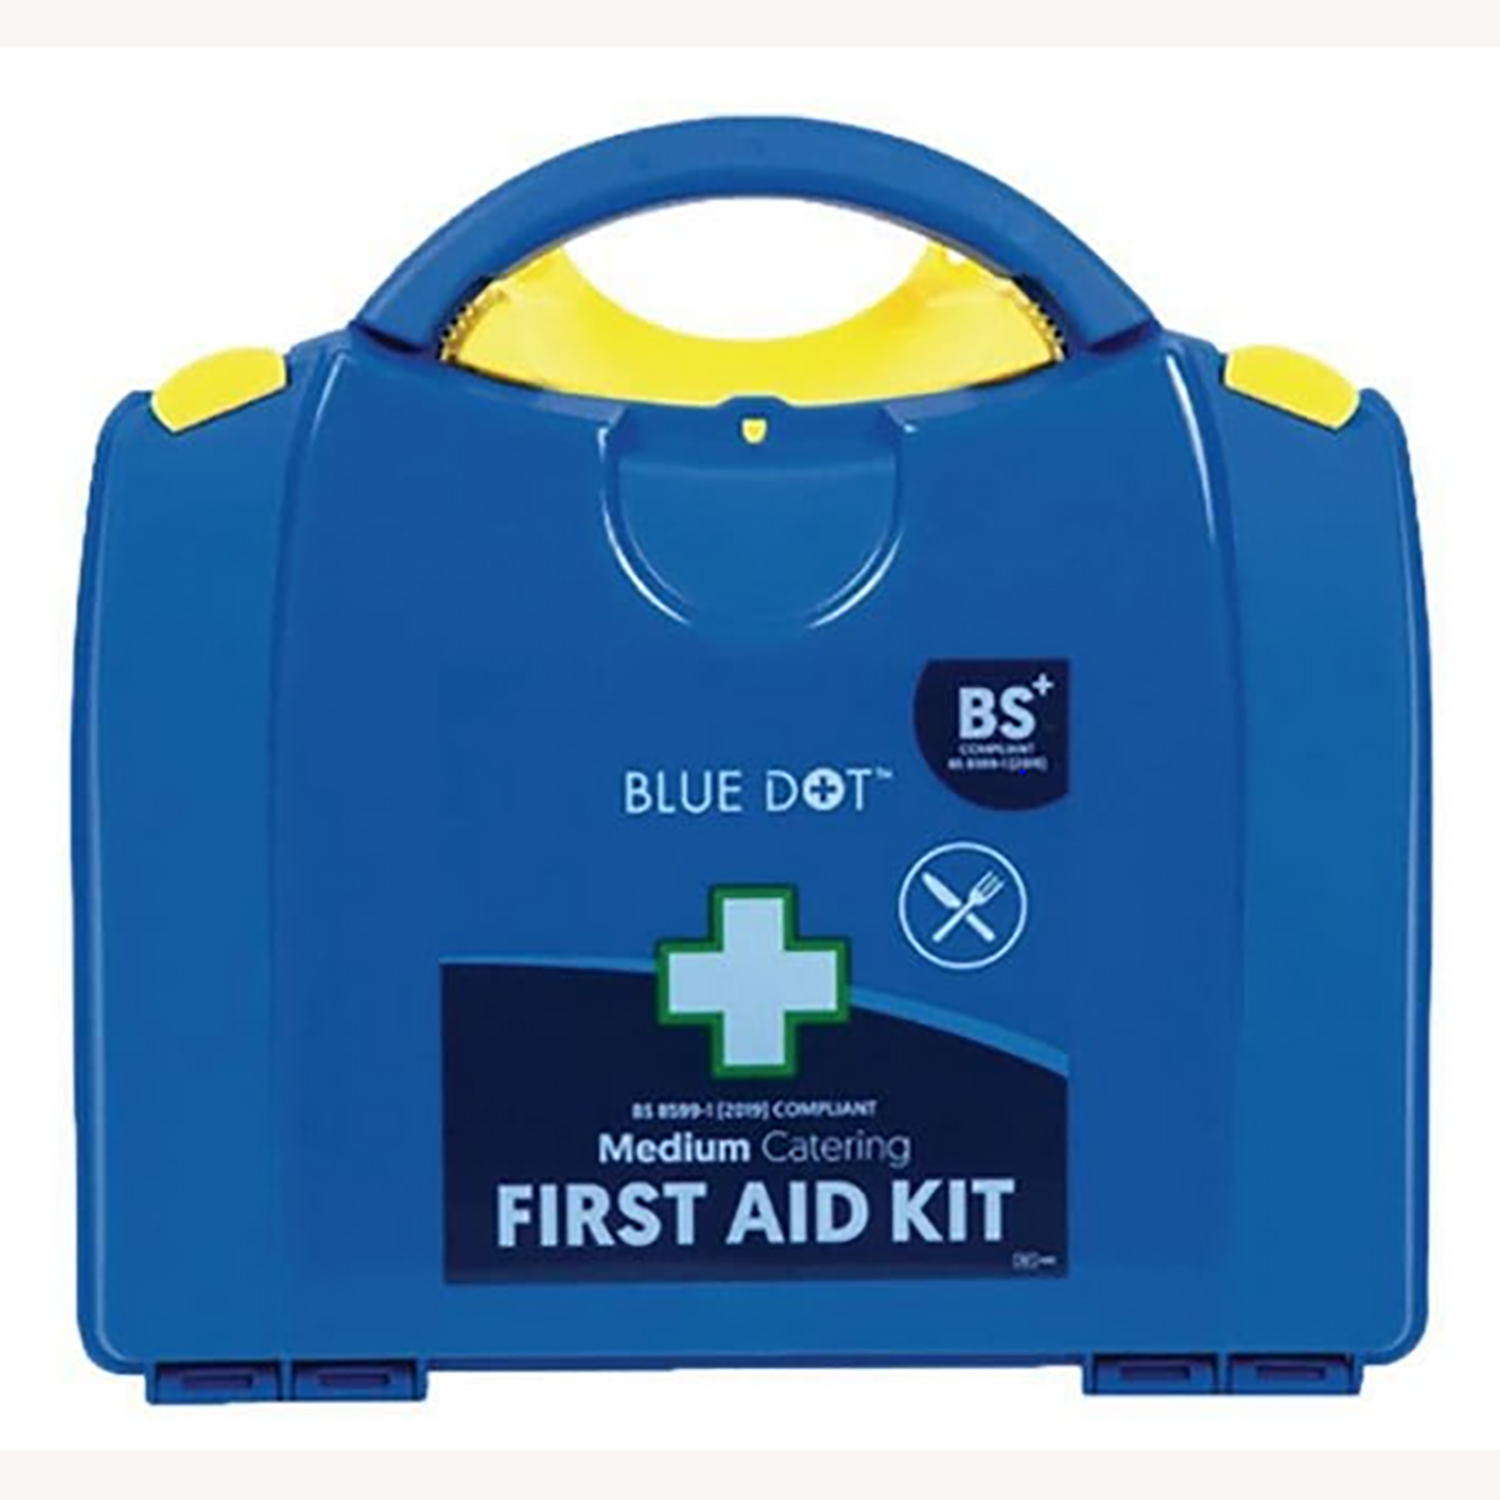 Blue Dot Catering First Aid Kit BS 8599-1 (2019) | Medium | Single